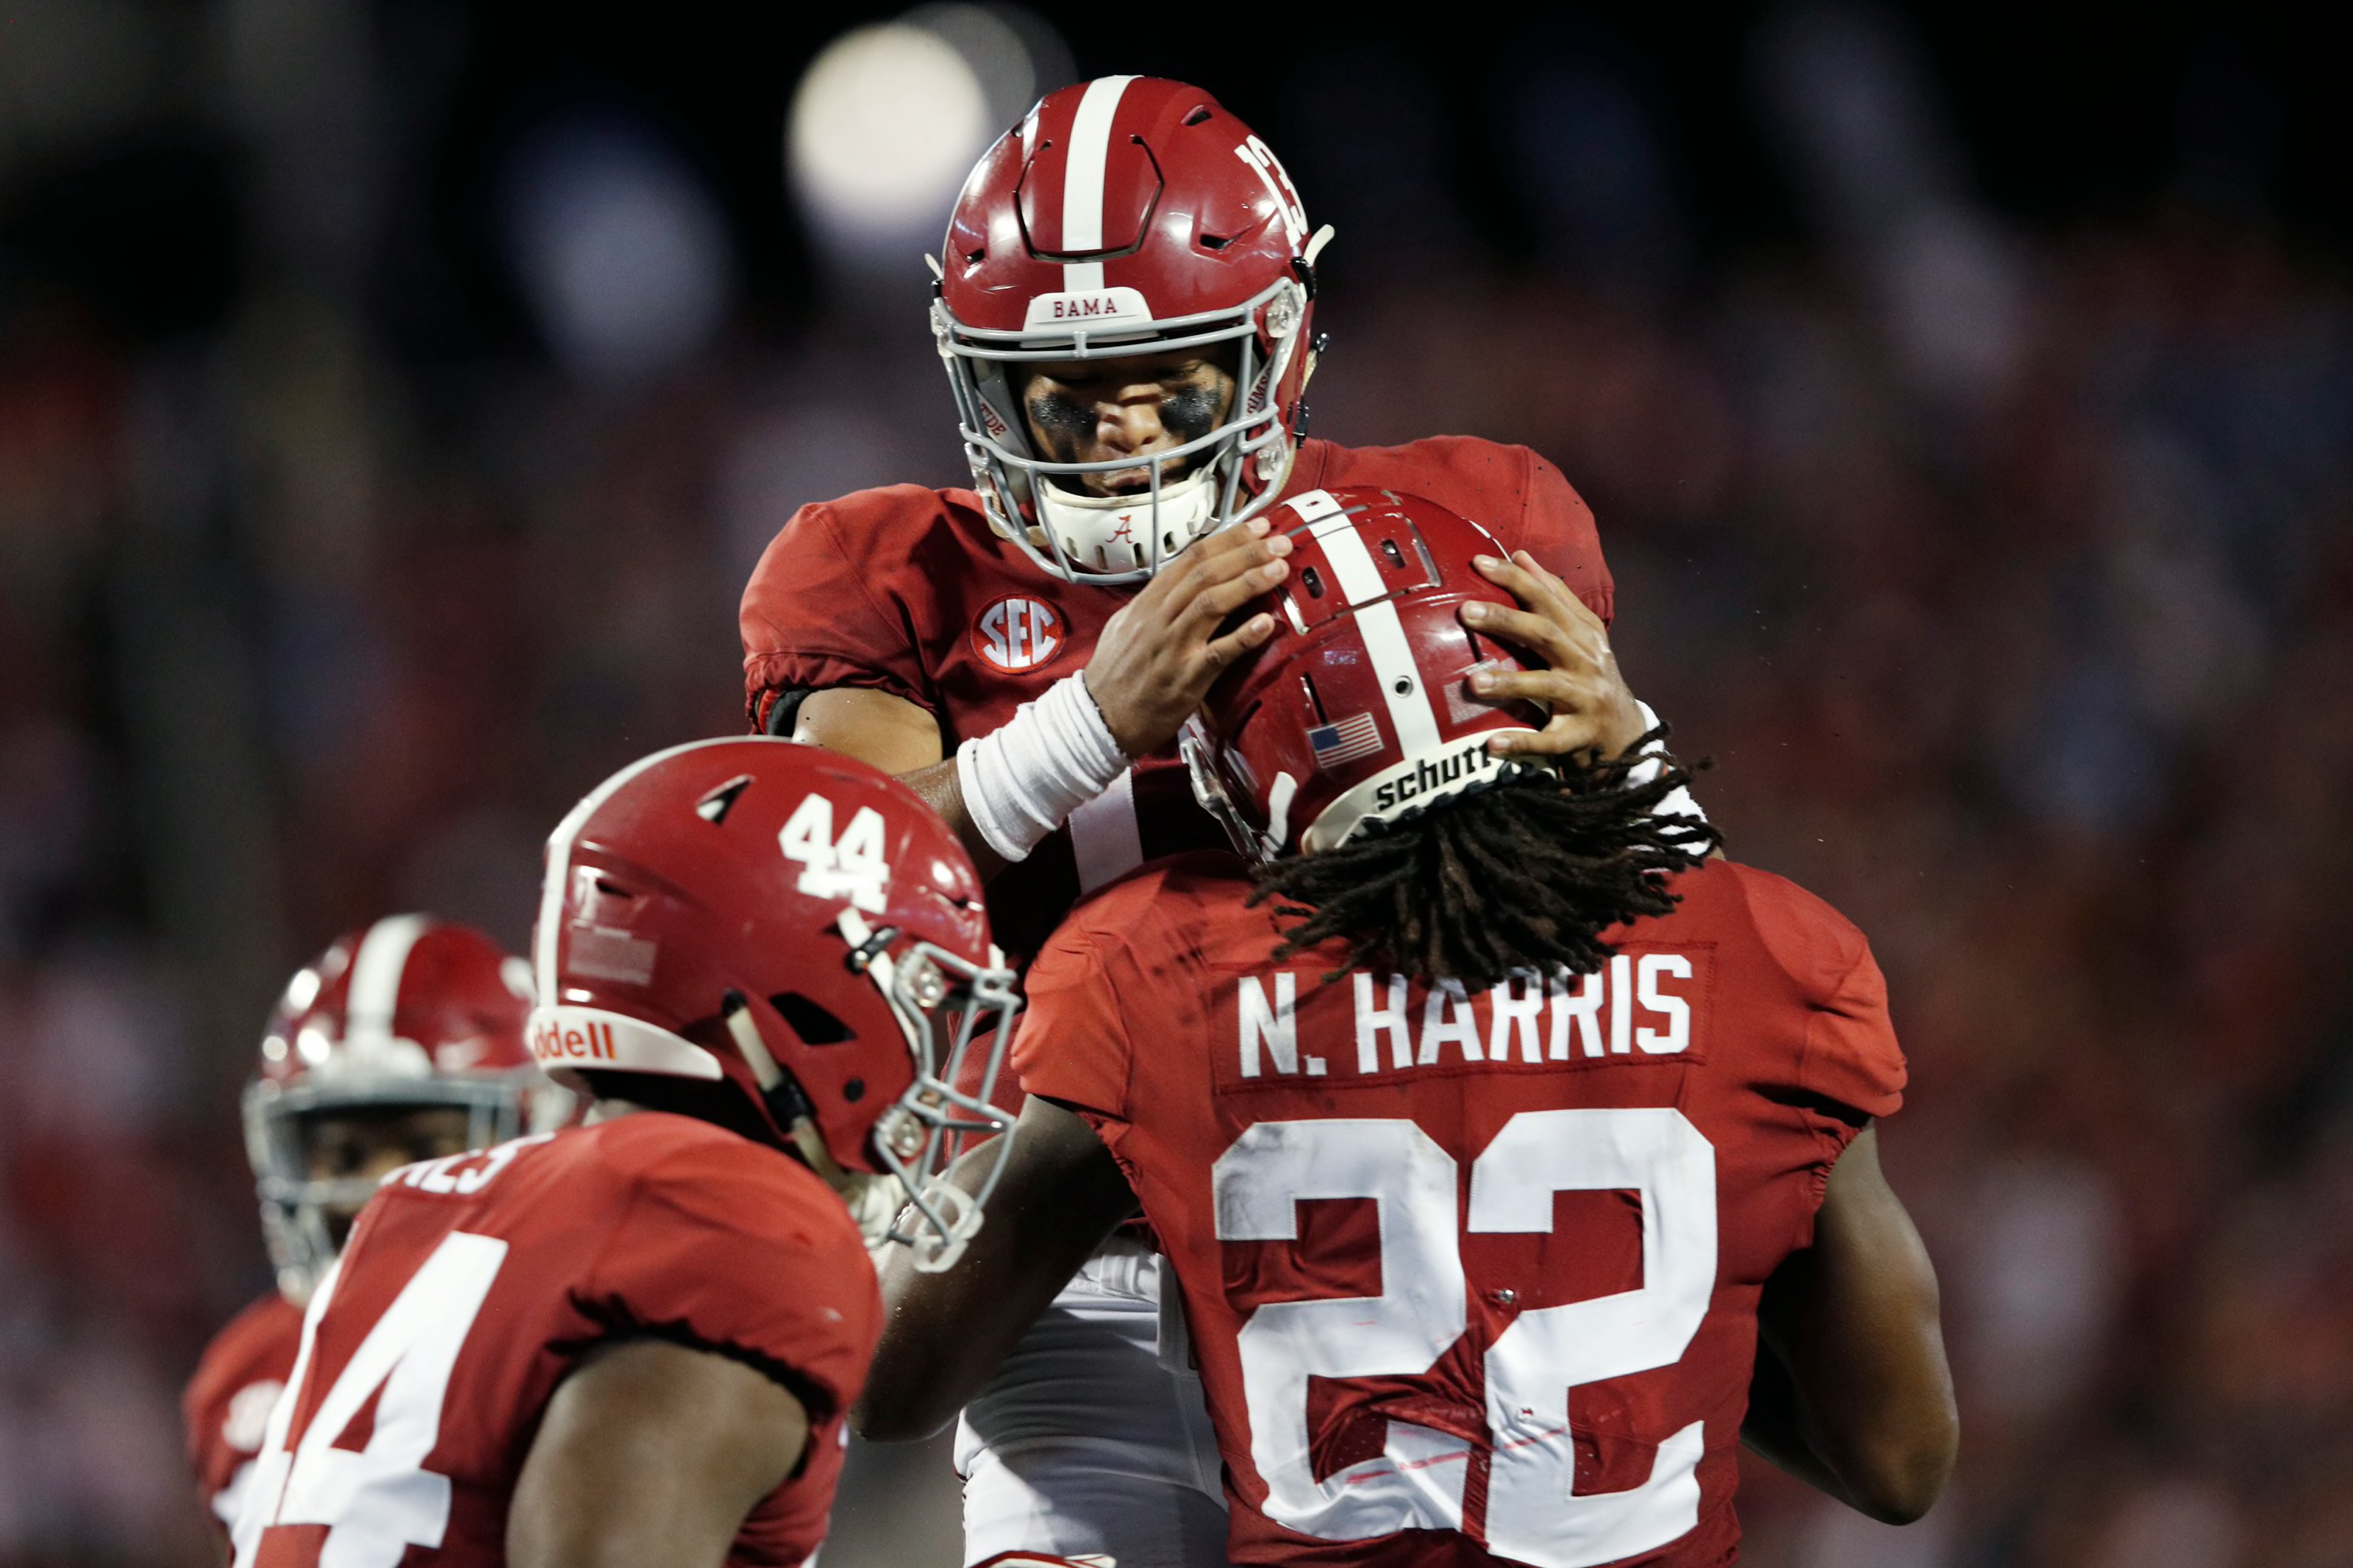 Alabama Football The Tide vs. Arkansas State twodeep, plus roster notes